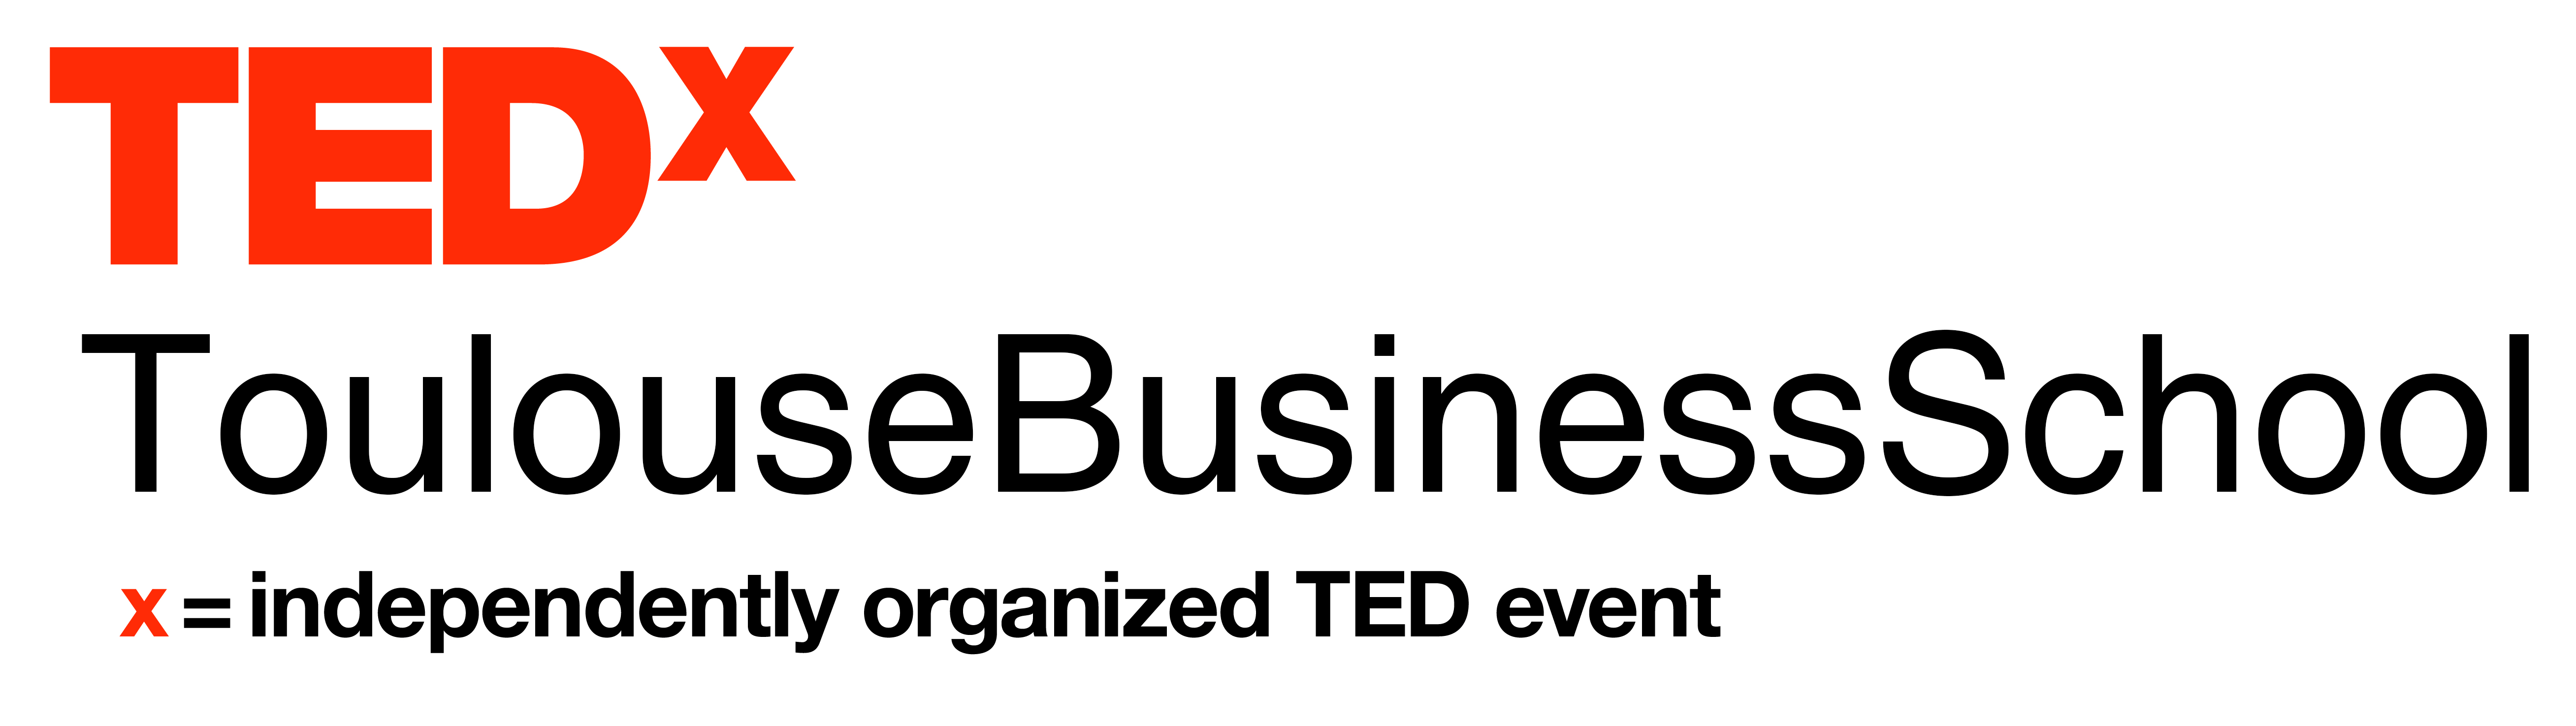 TEDx Toulouse Business School White